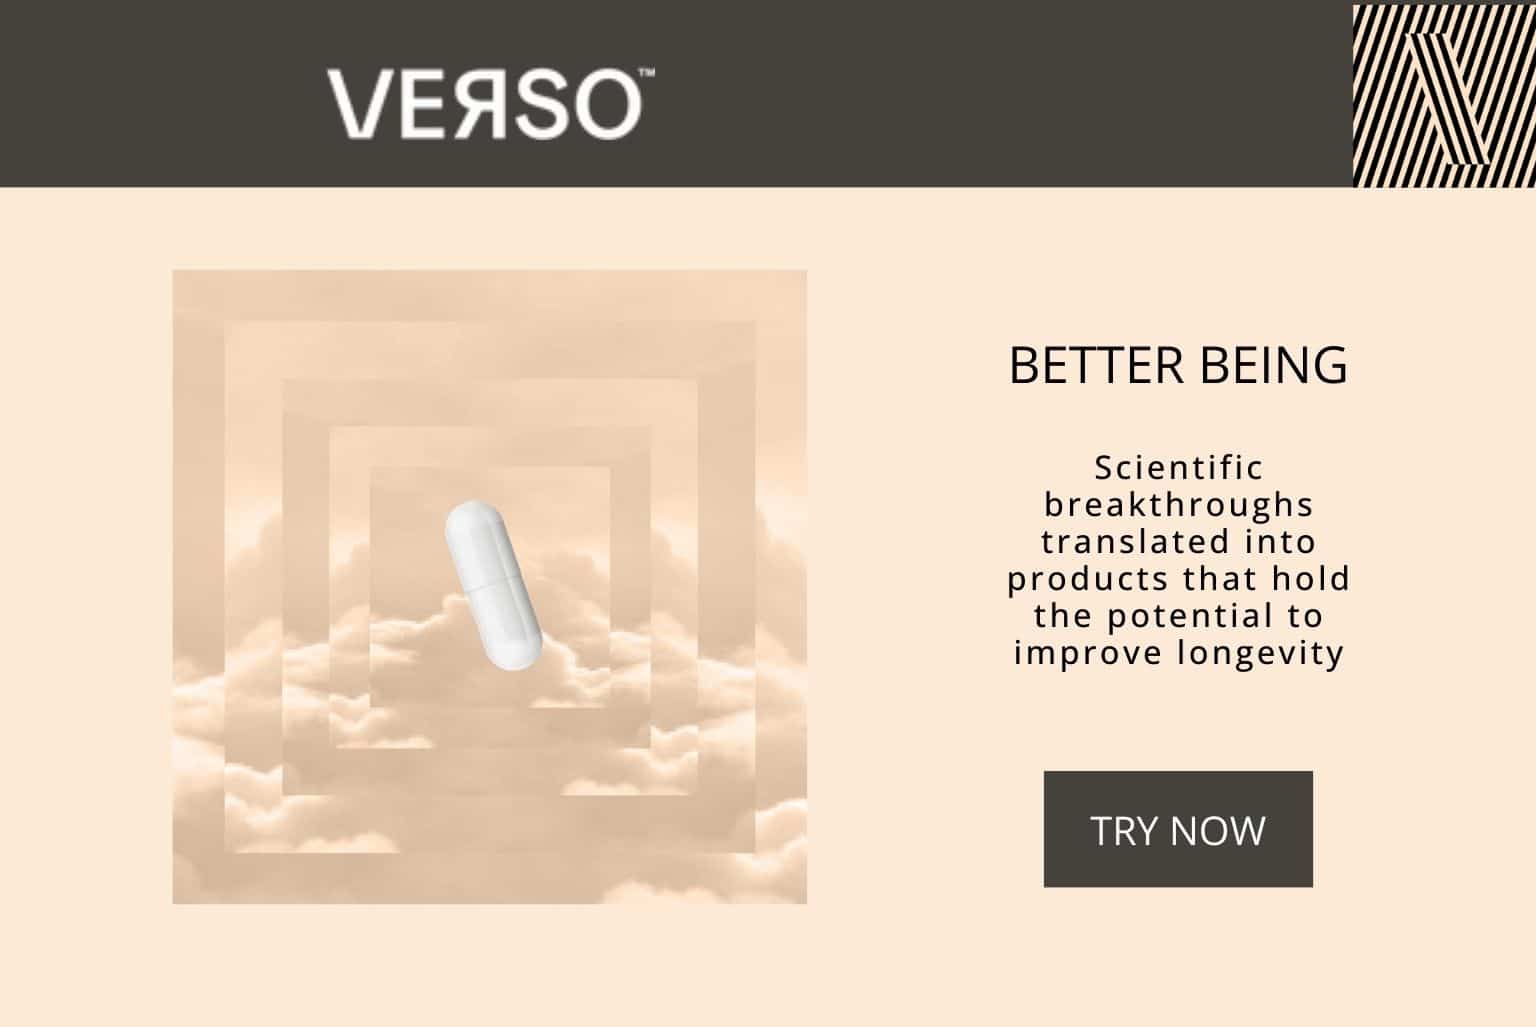 Verso translates scientific breakthroughs into supplements that hold the potential to improve longevity.